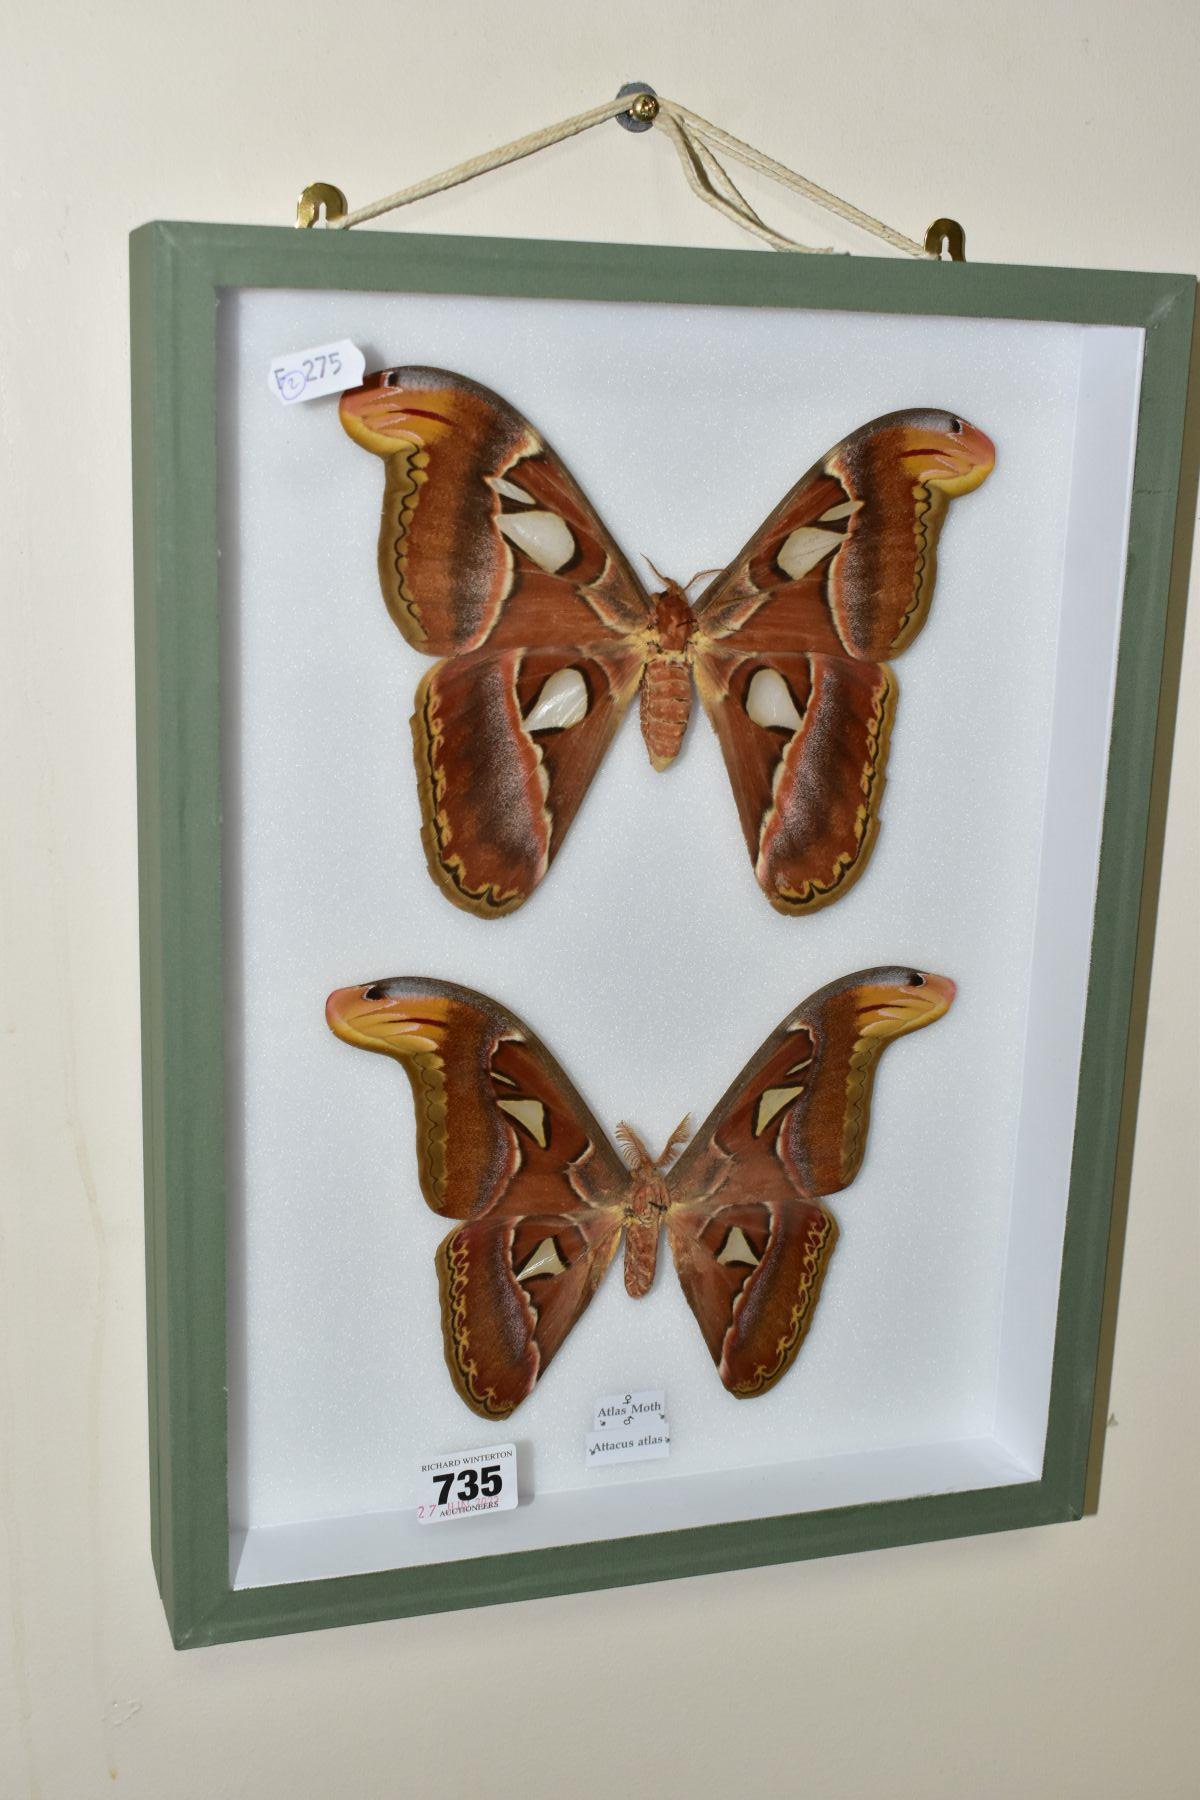 ENTOMOLOGY: A CASED DISPLAY OF ATLAS MOTHS, a pale green wall hanging display case with glass front,